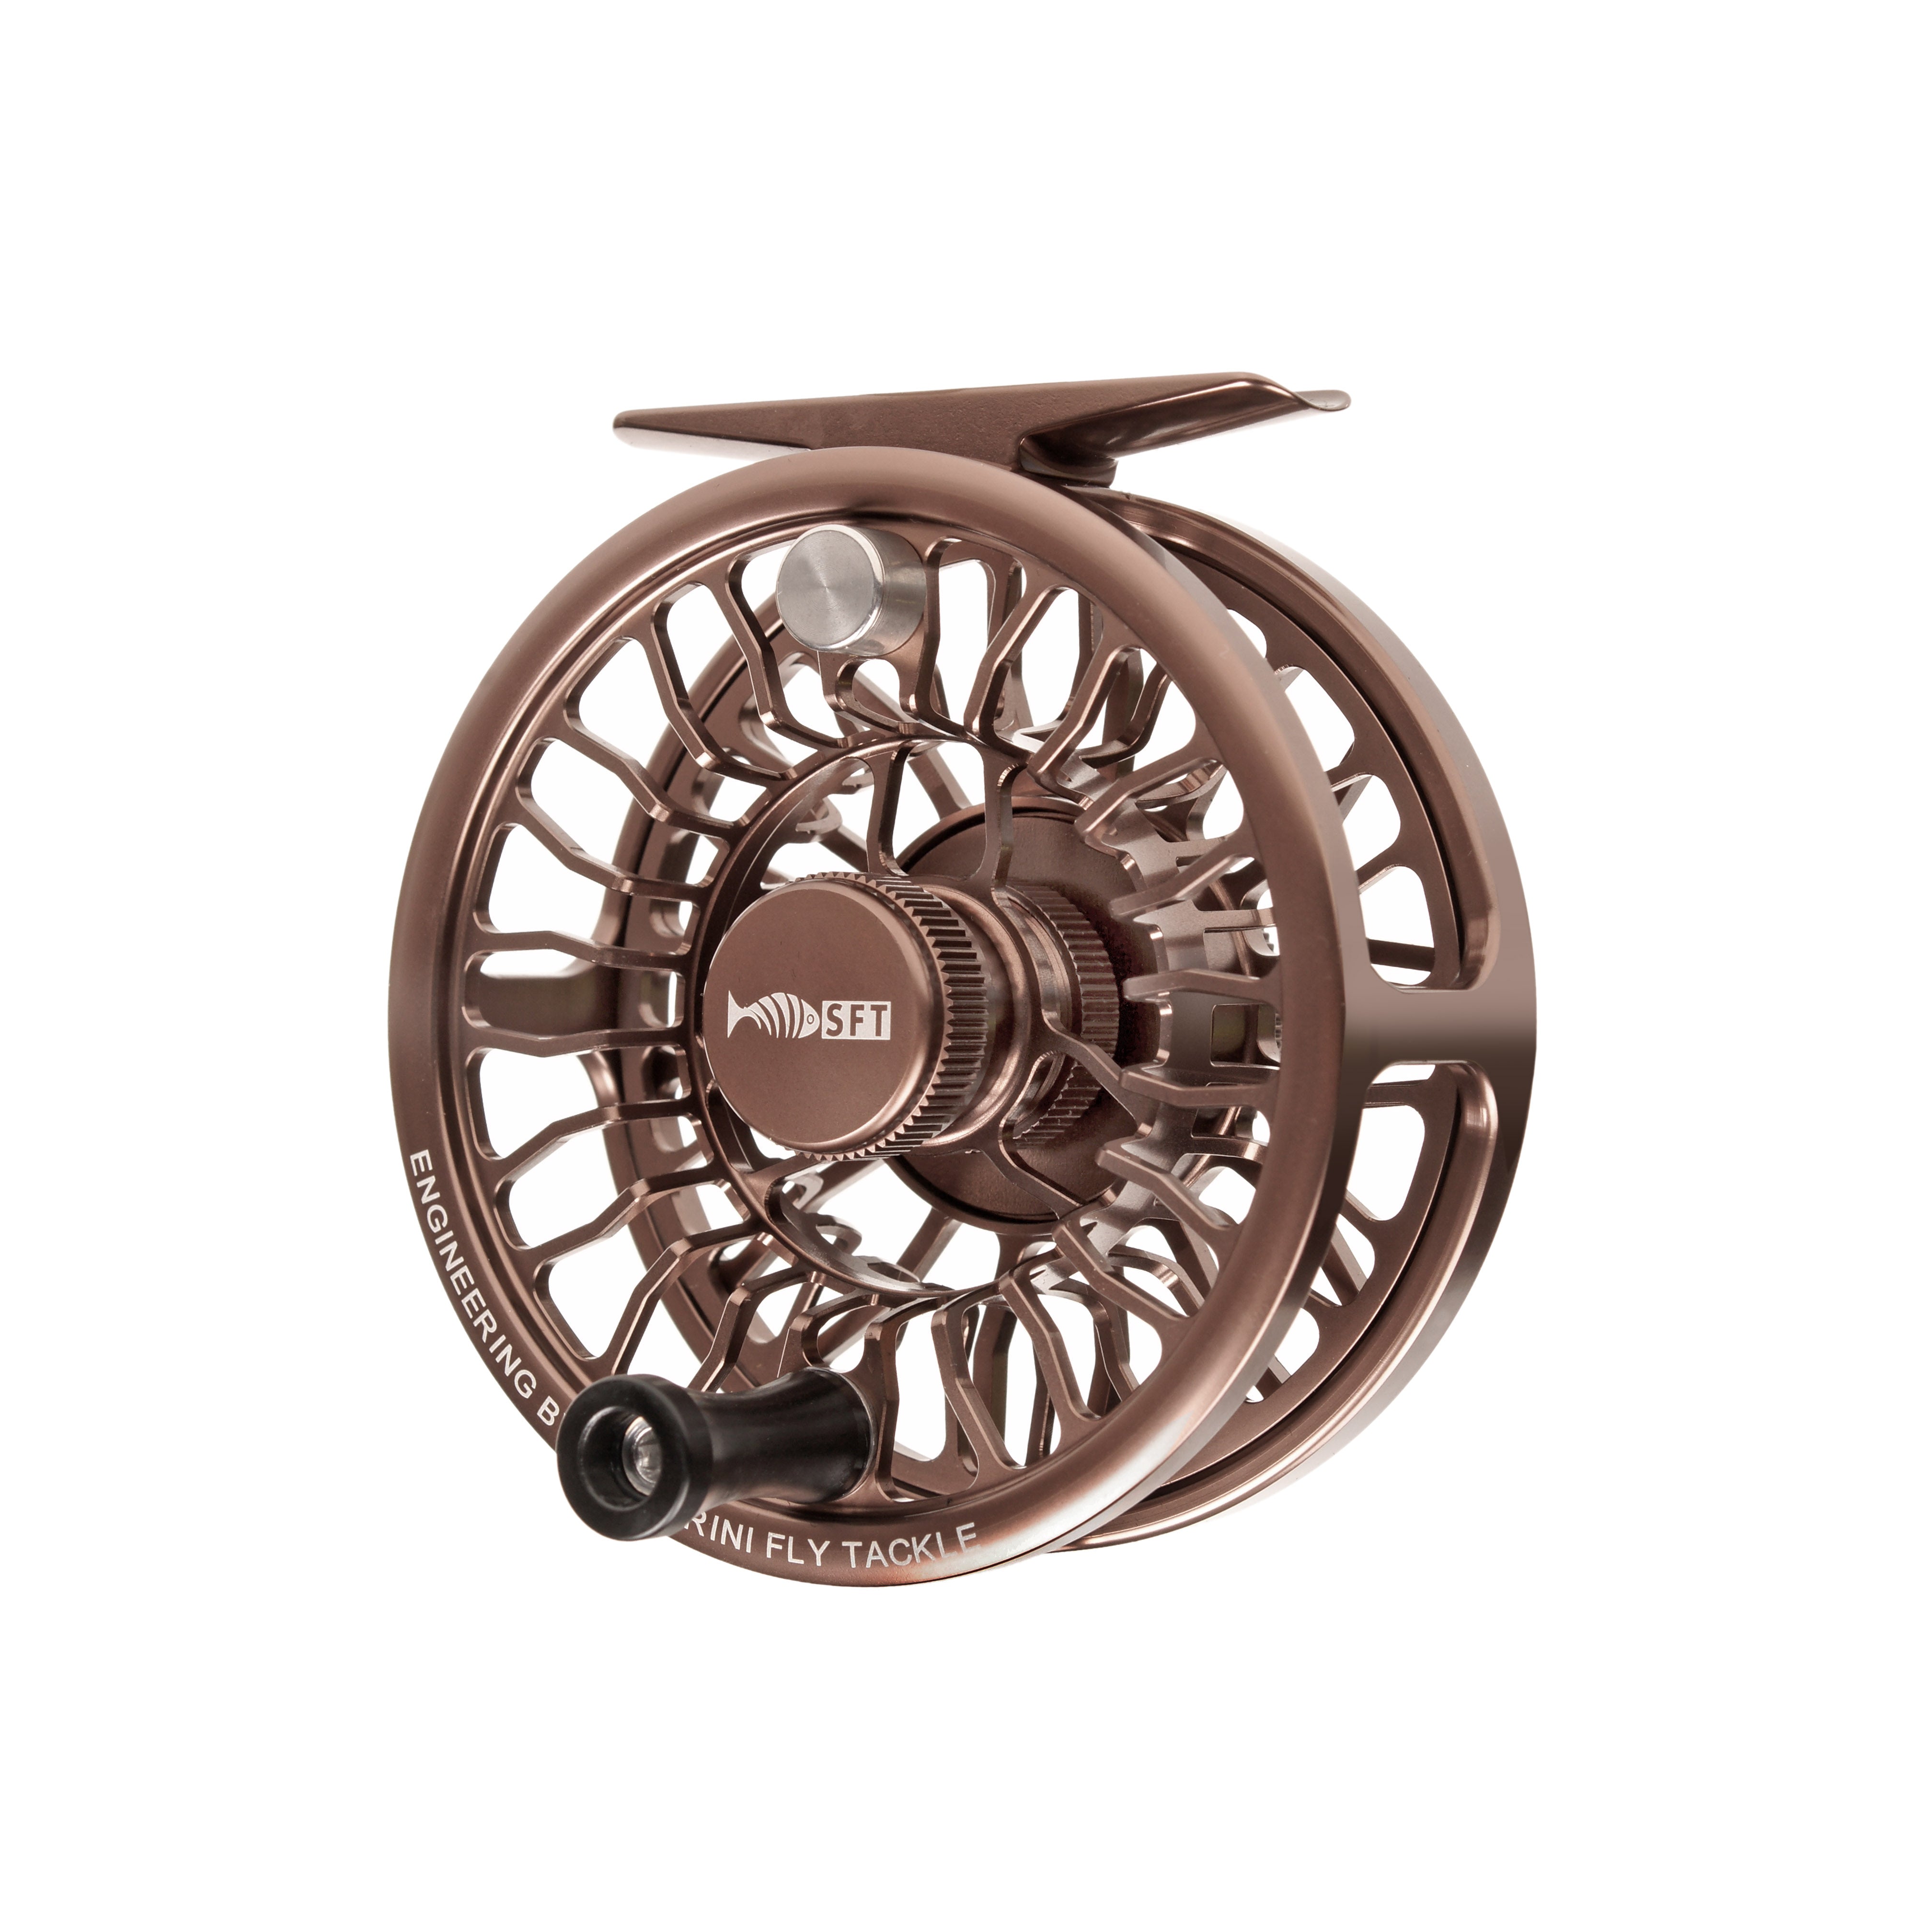 inexpensive full cage reel for Euro rod?